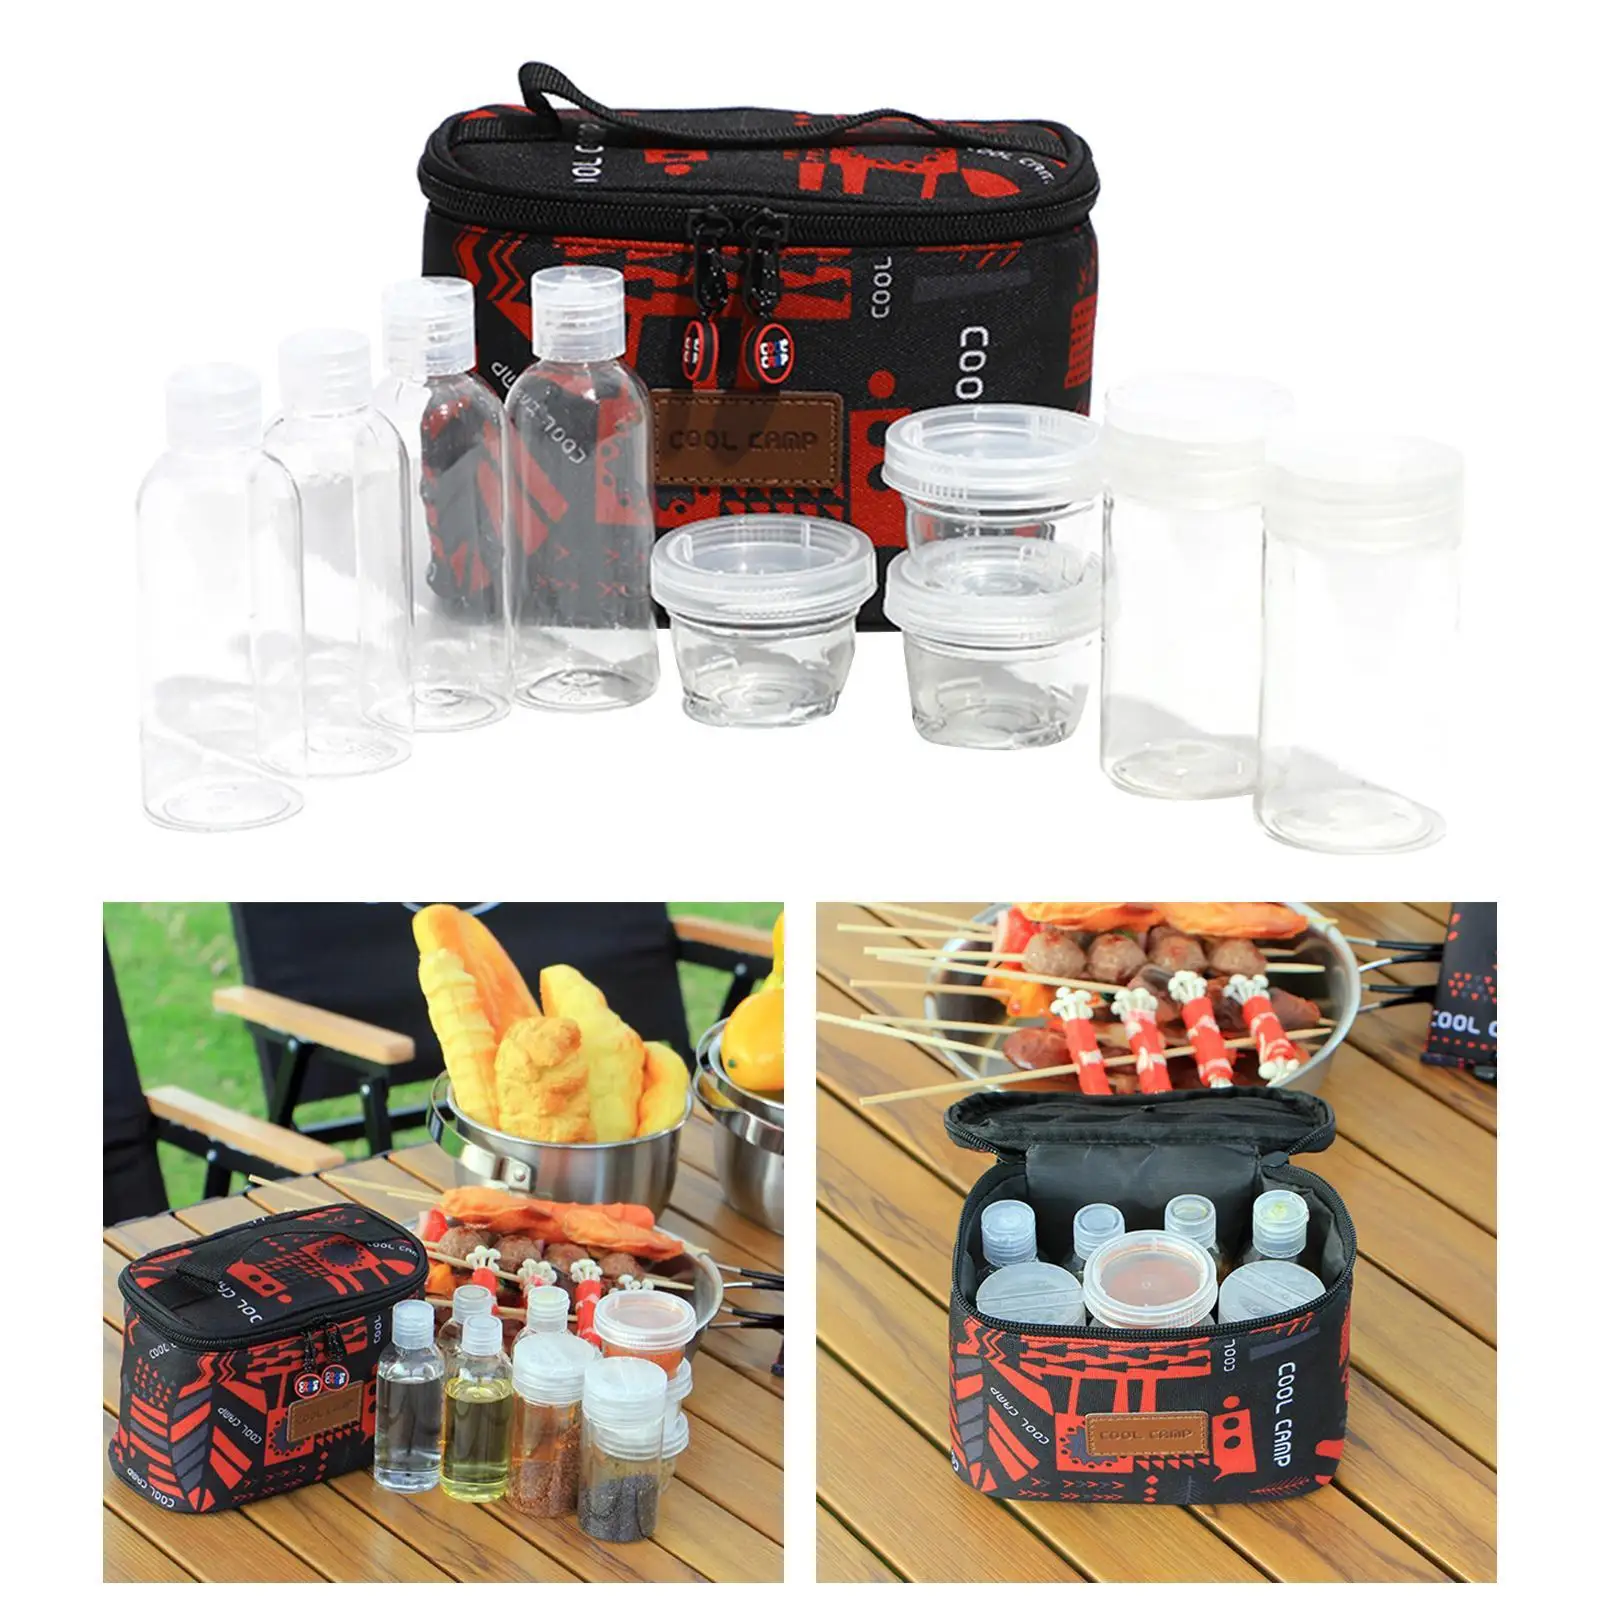 Camping Spice Jars Set of 9 Seasoning Organizer Container for Outdoor BBQ